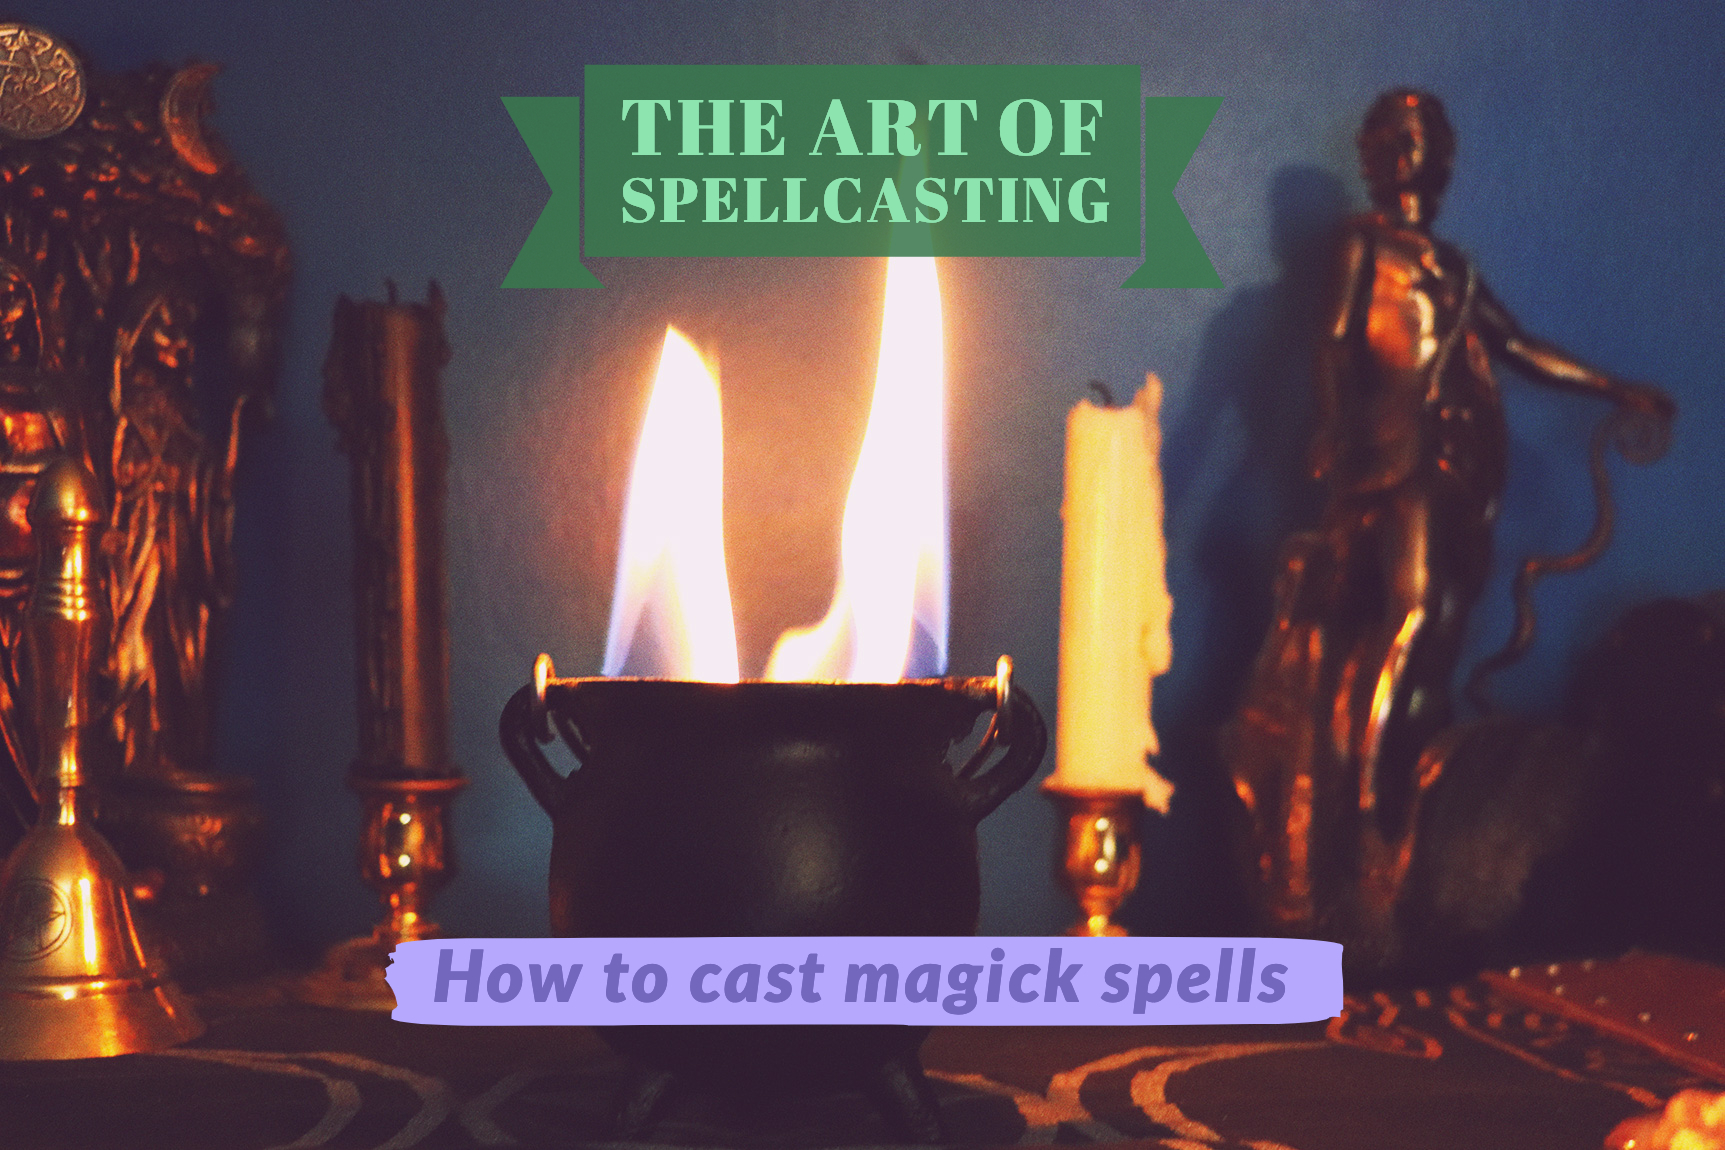 The art of spellcasting how to cast a magick spell